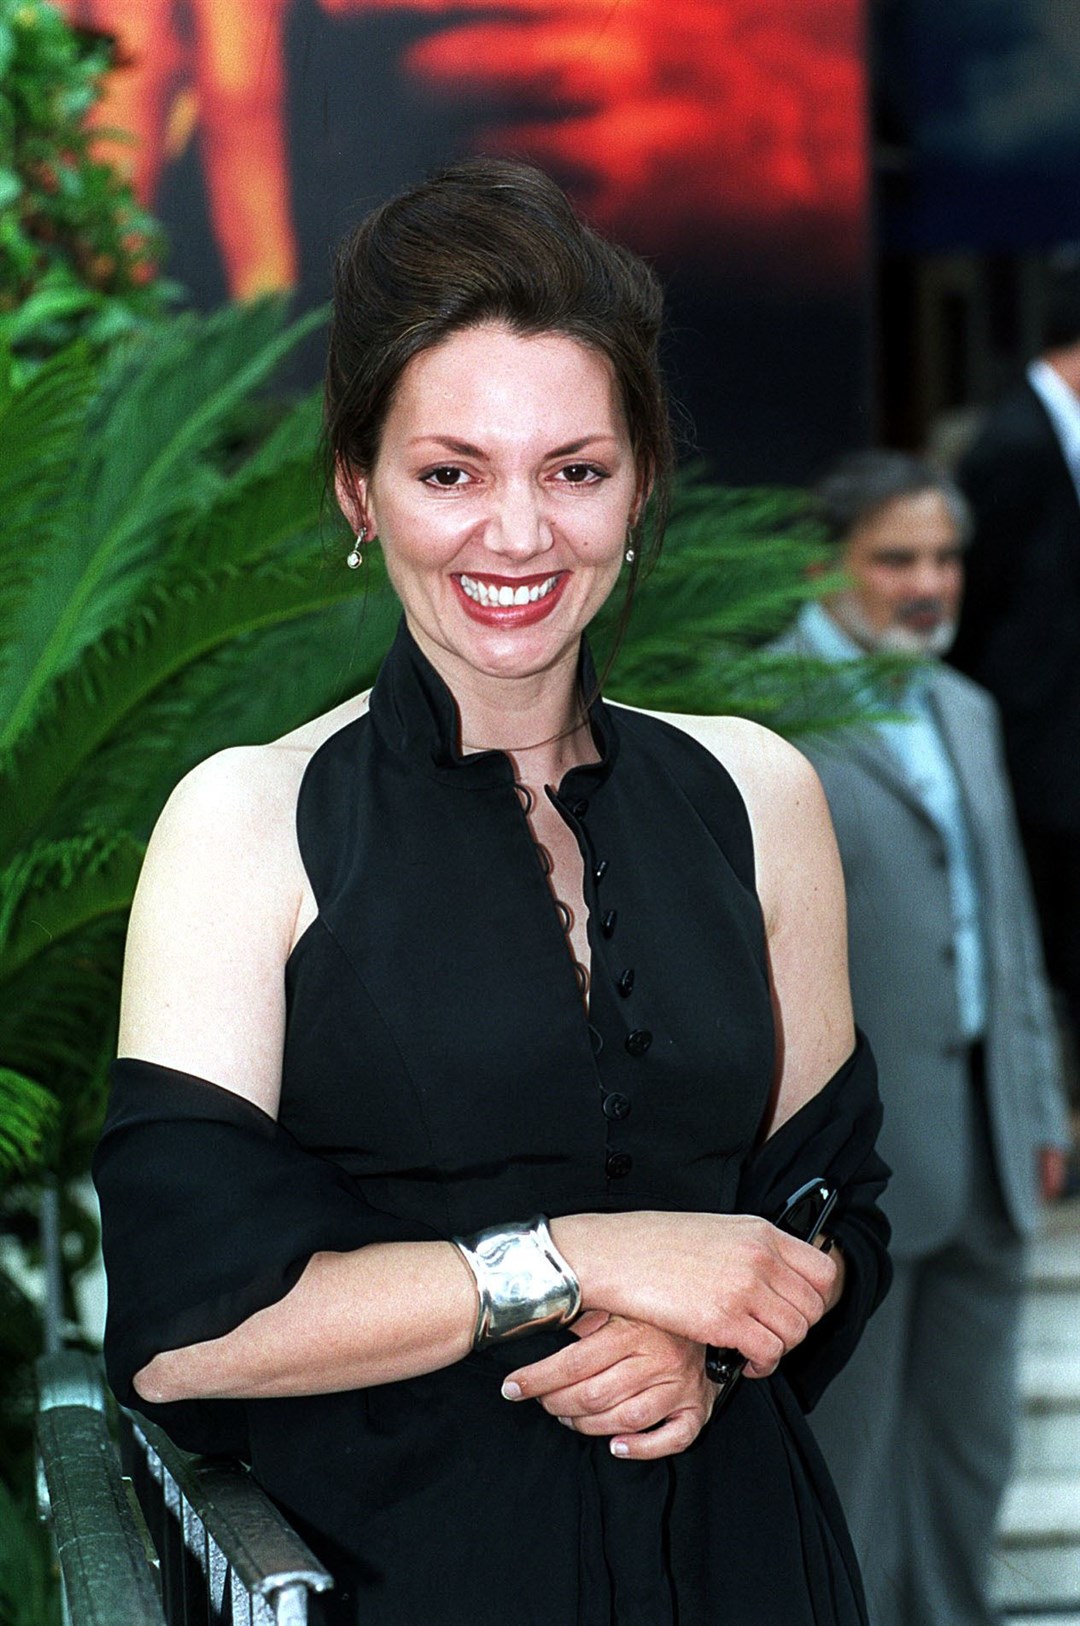 Joanne Whalley, star of the 1988 fantasy film Willow and the 2022 follow-up series of the same name, said the news had ‘stopped me in my tracks’ (Anthony Harvey/PA)